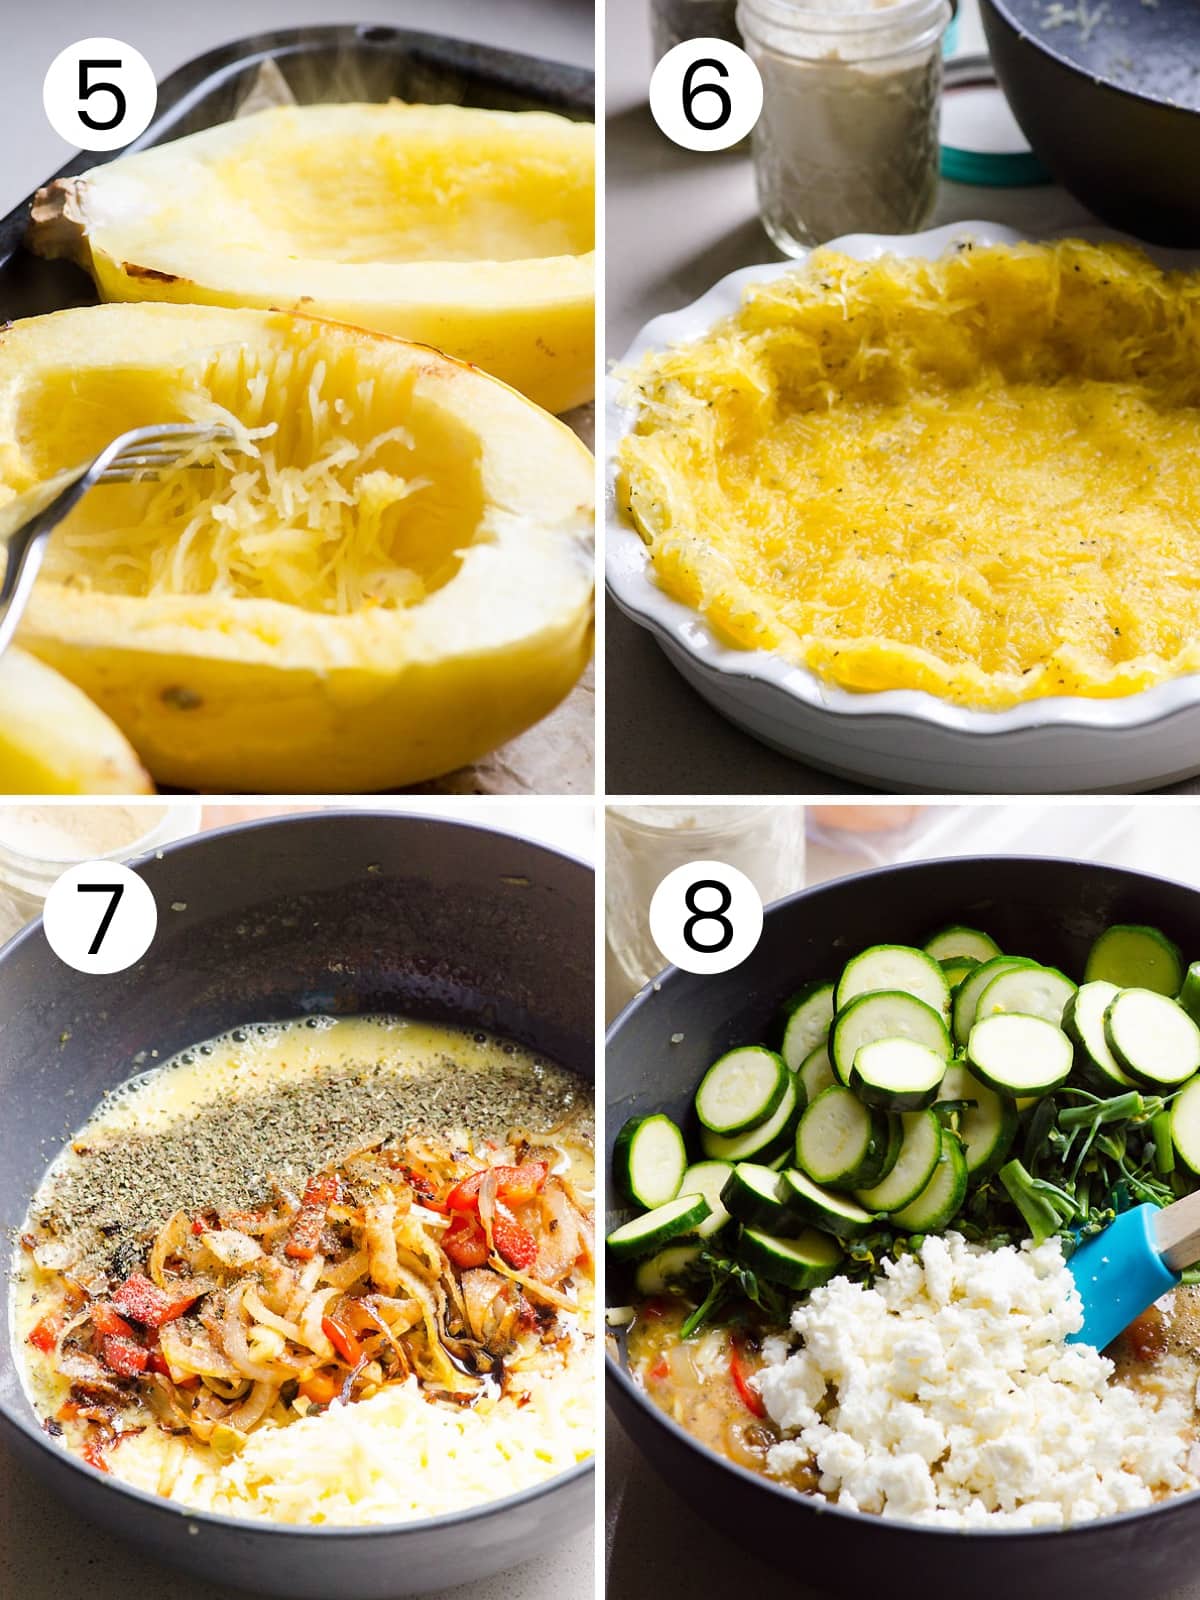 Step by step process how to make crust with spaghetti squash noodles and quiche filling.